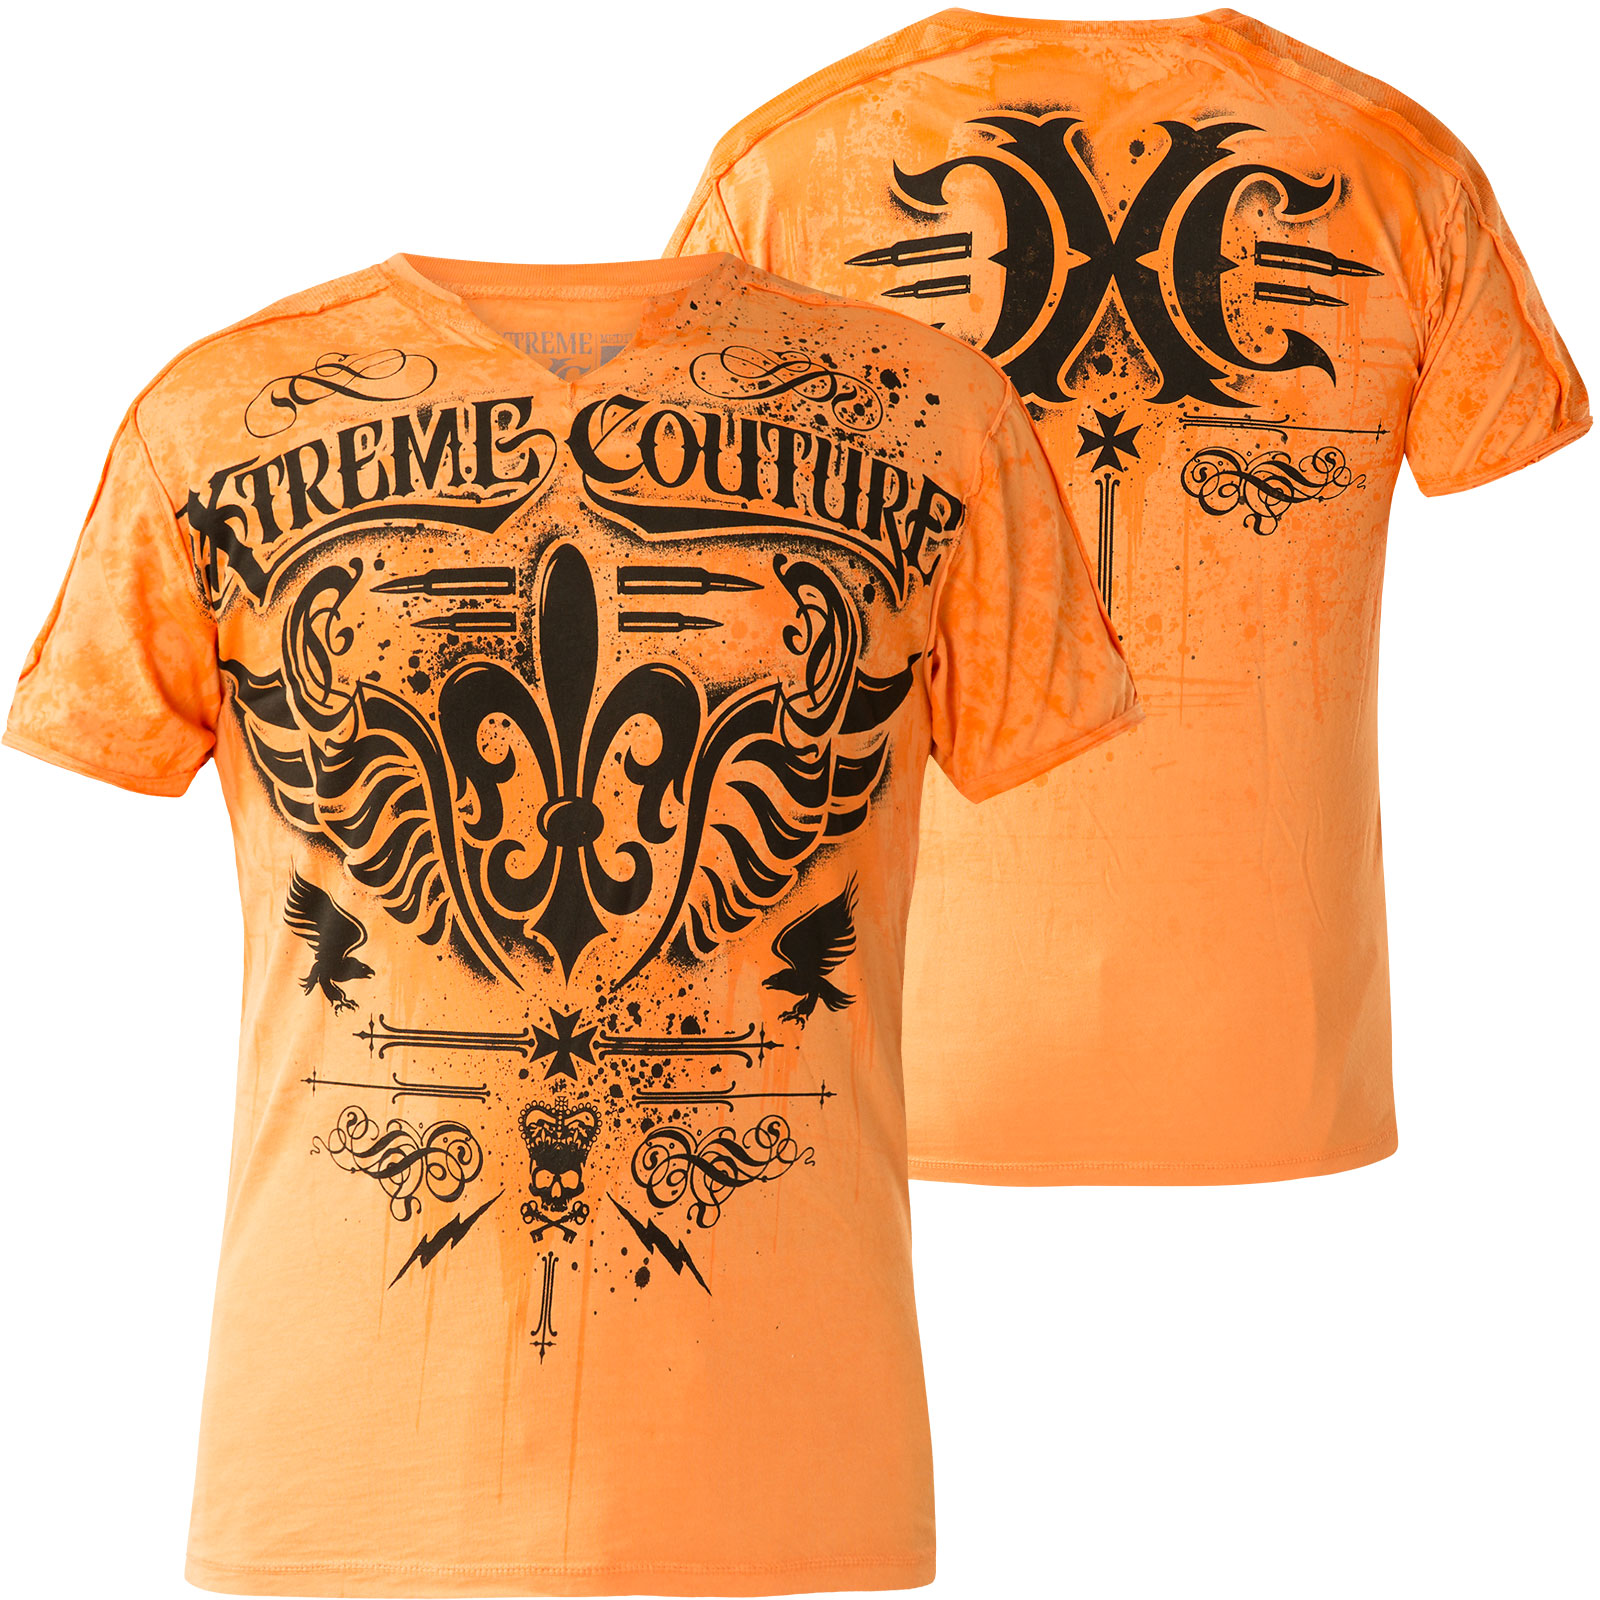 Xtreme Couture T- Shirt Tribute SS Notch with a large cross and skulls